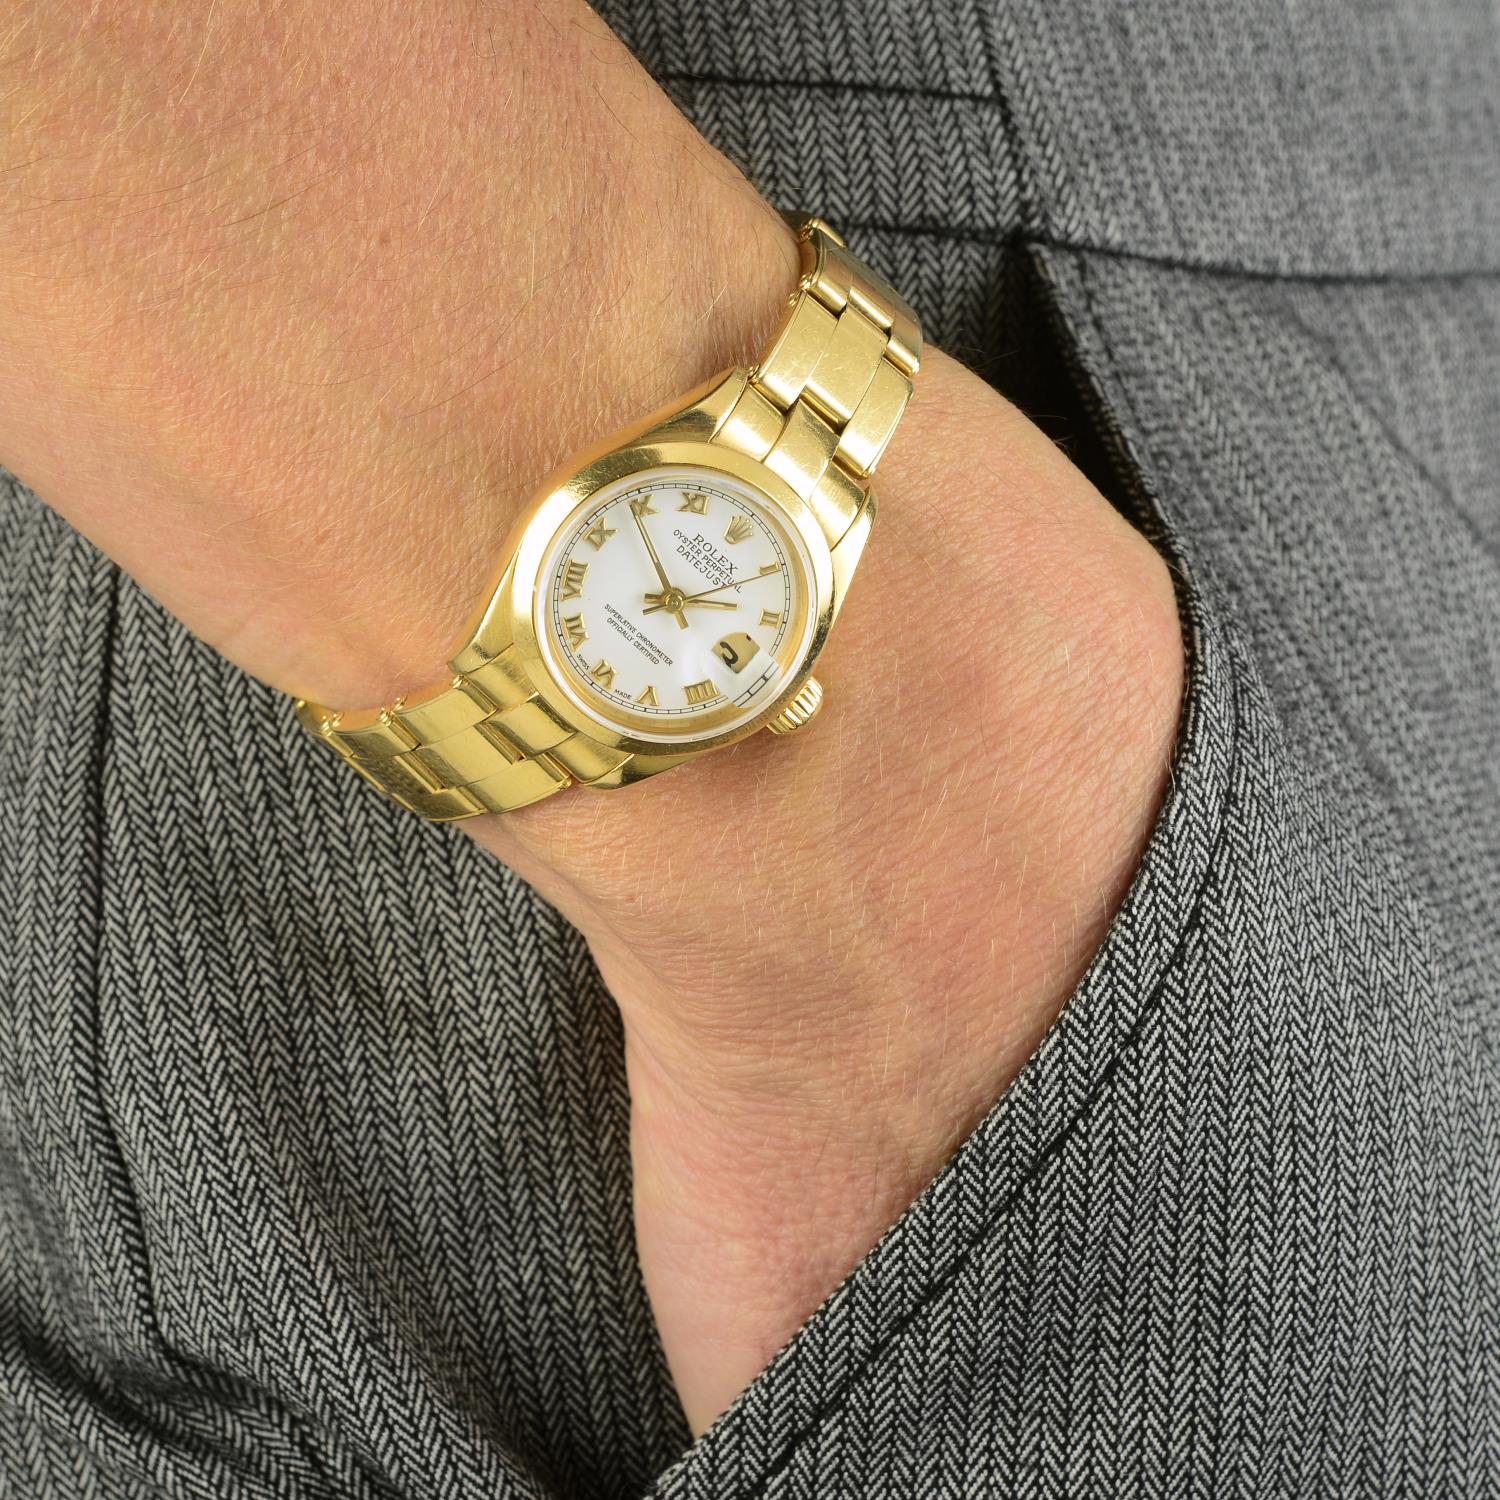 ROLEX - a lady's Oyster Perpetual Datejust bracelet watch. - Image 3 of 3